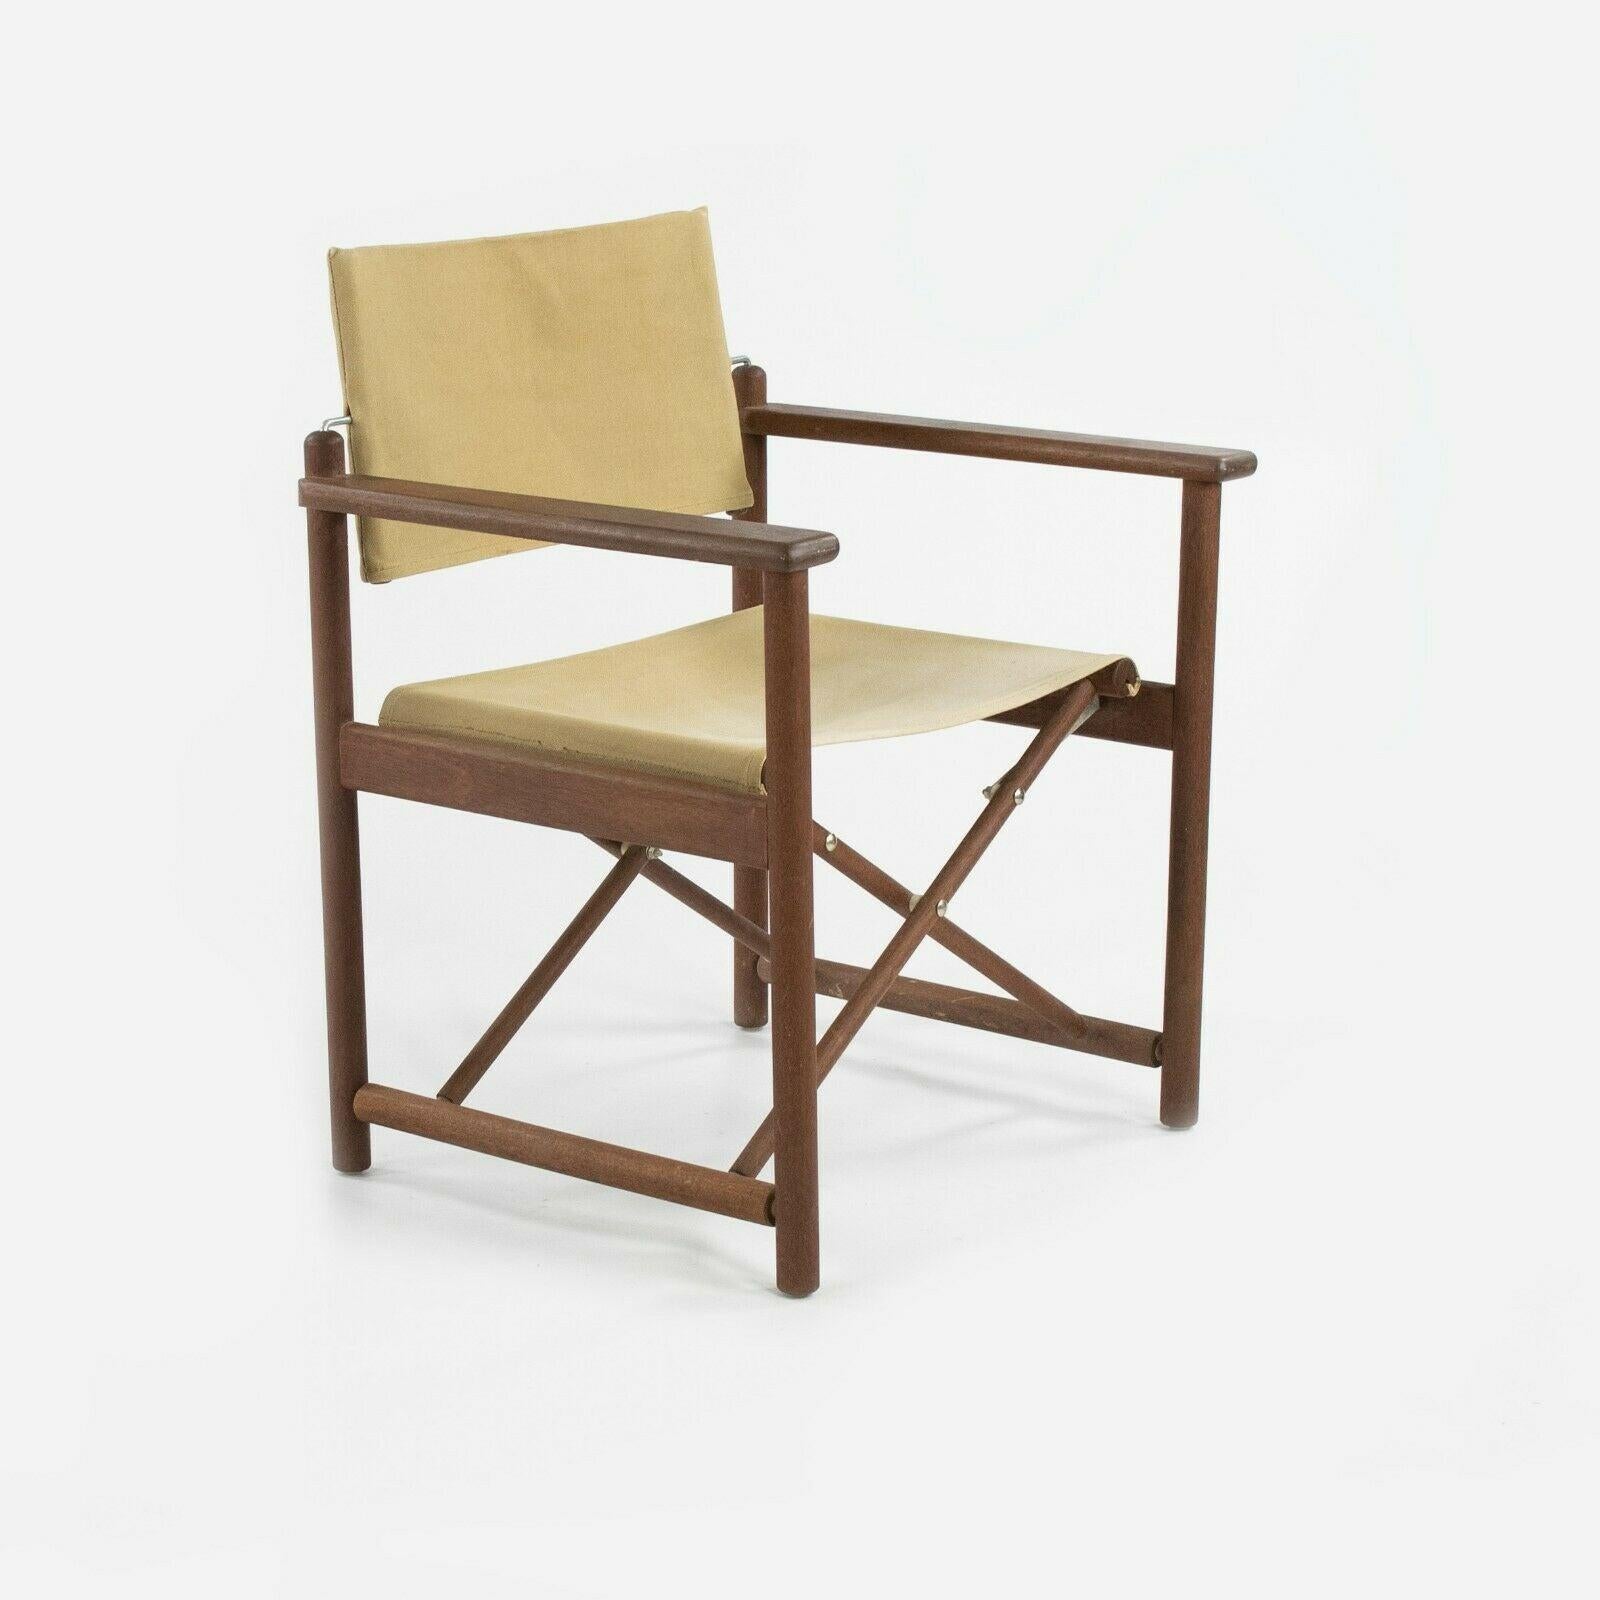 1960s Danish Modern Walnut and Canvas Folding Campaign Chair In Good Condition For Sale In Philadelphia, PA